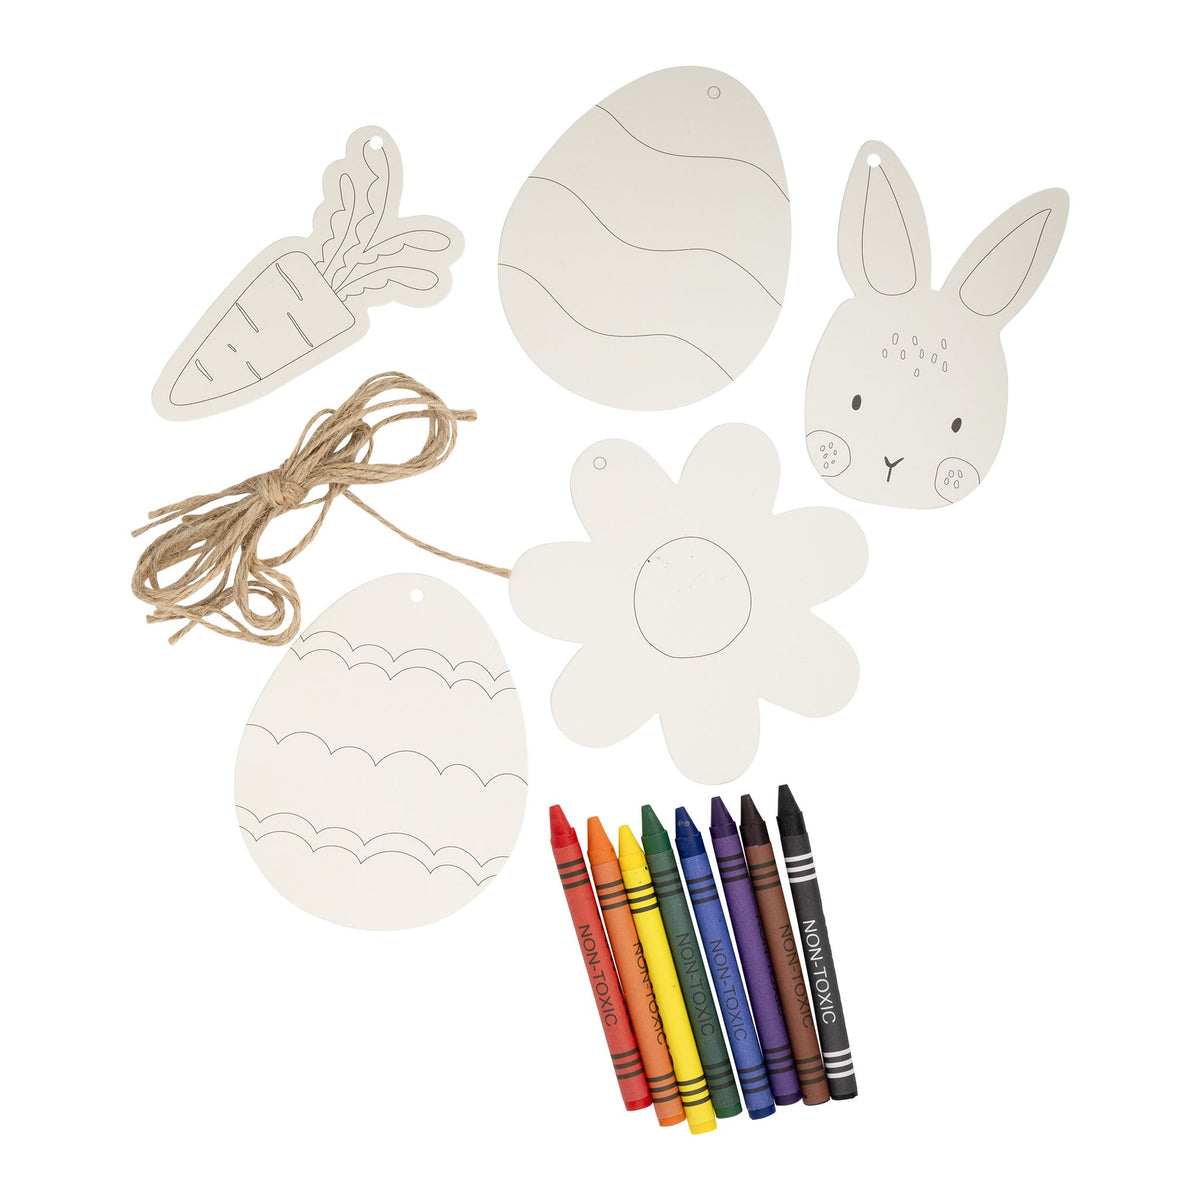 Easter Ornament Activity - The Preppy Bunny